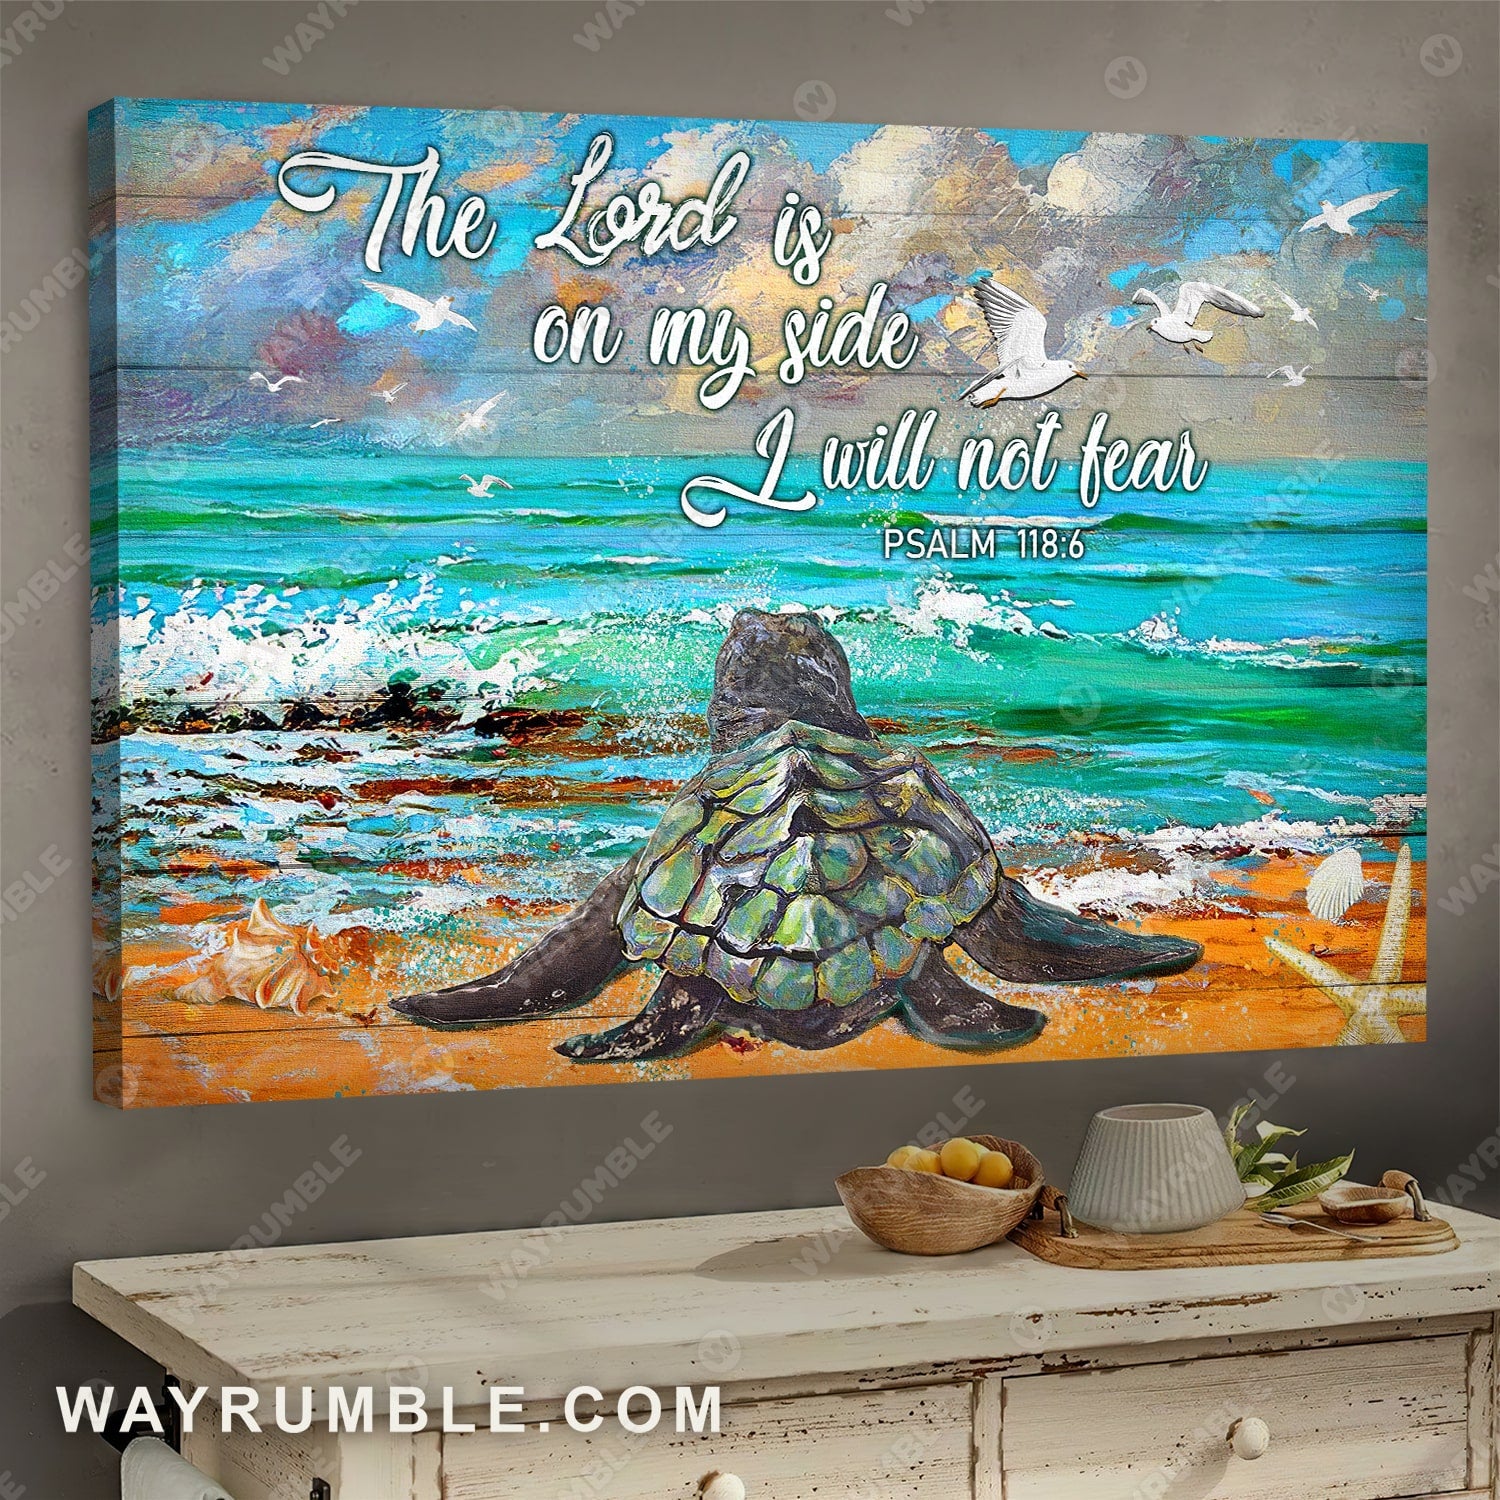 Sea turtle, Sand beach painting, The Lord is on my side I will not fear - Jesus Landscape Canvas Prints, Wall Art